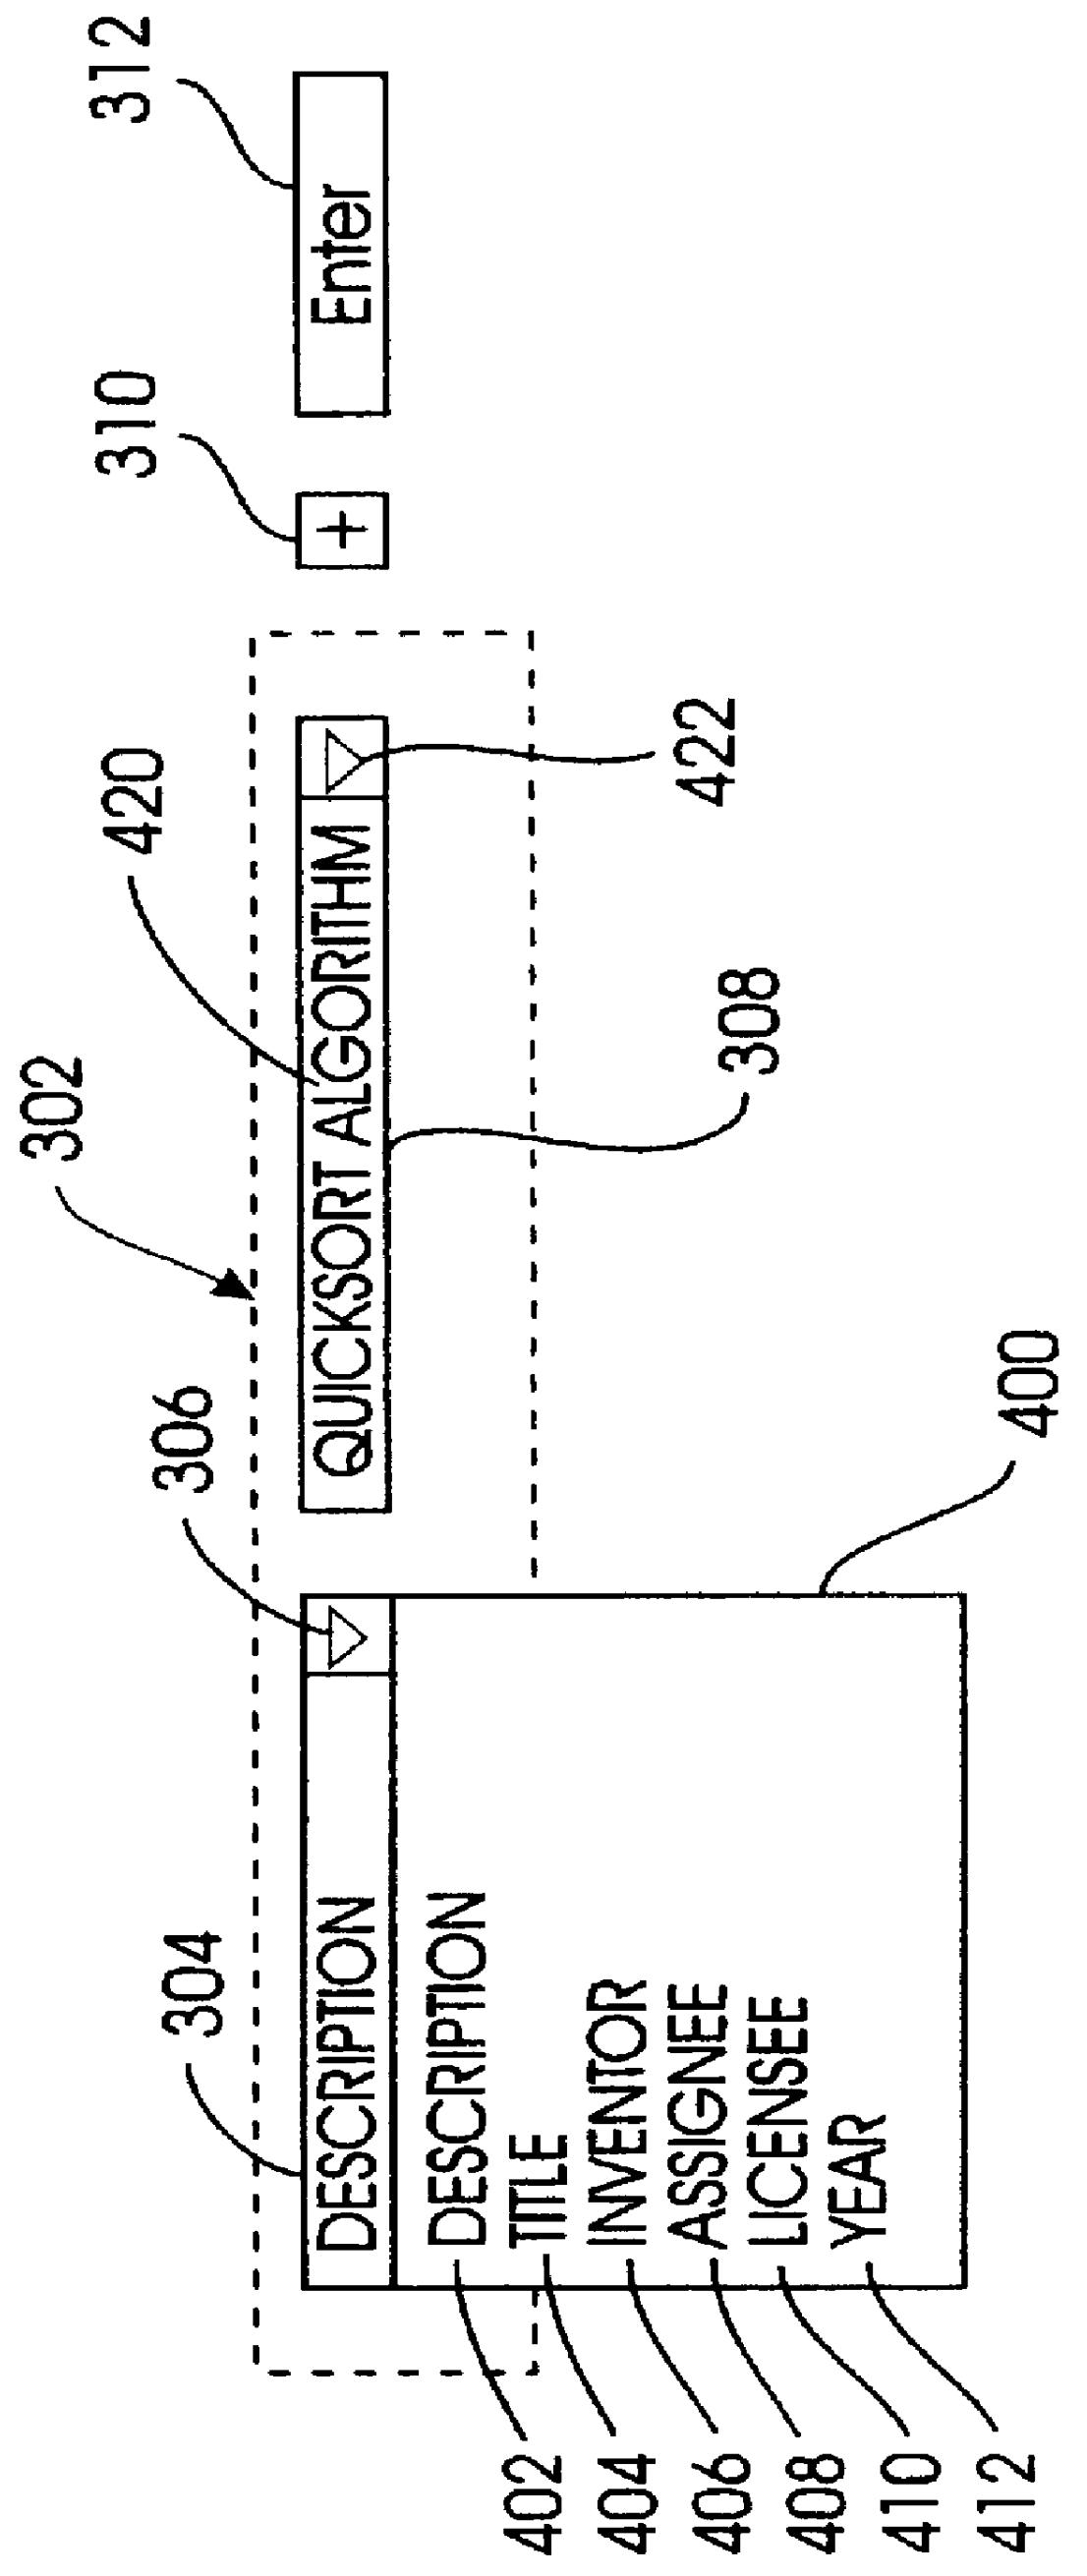 System for creating structured fields on electronic forms